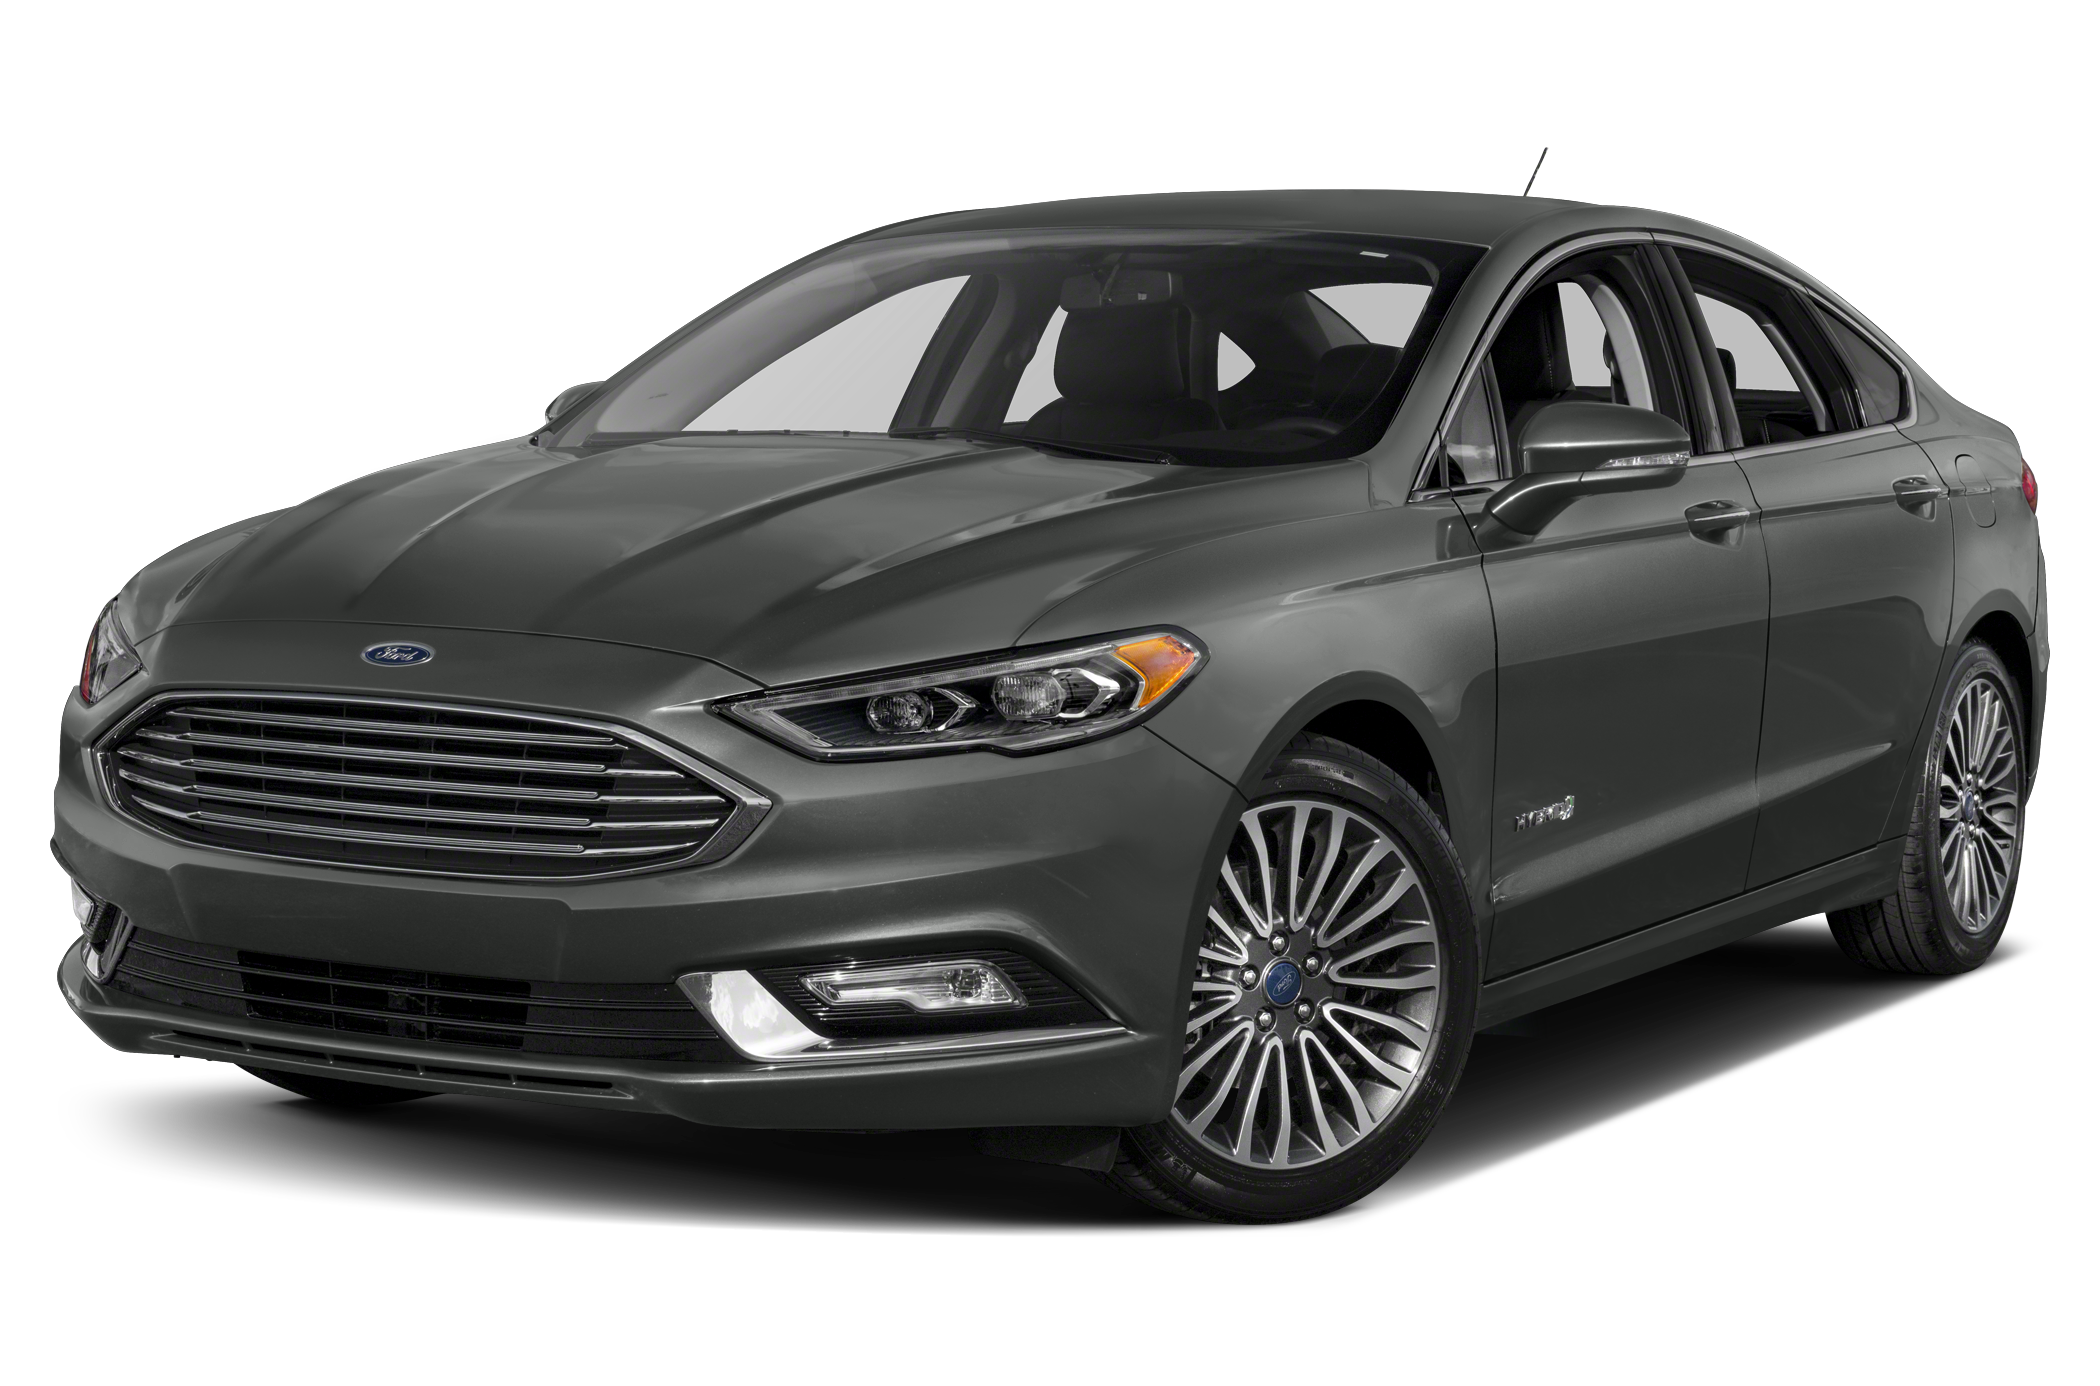 Used 2018 Ford Fusion Hybrid for Sale Near Me | Cars.com